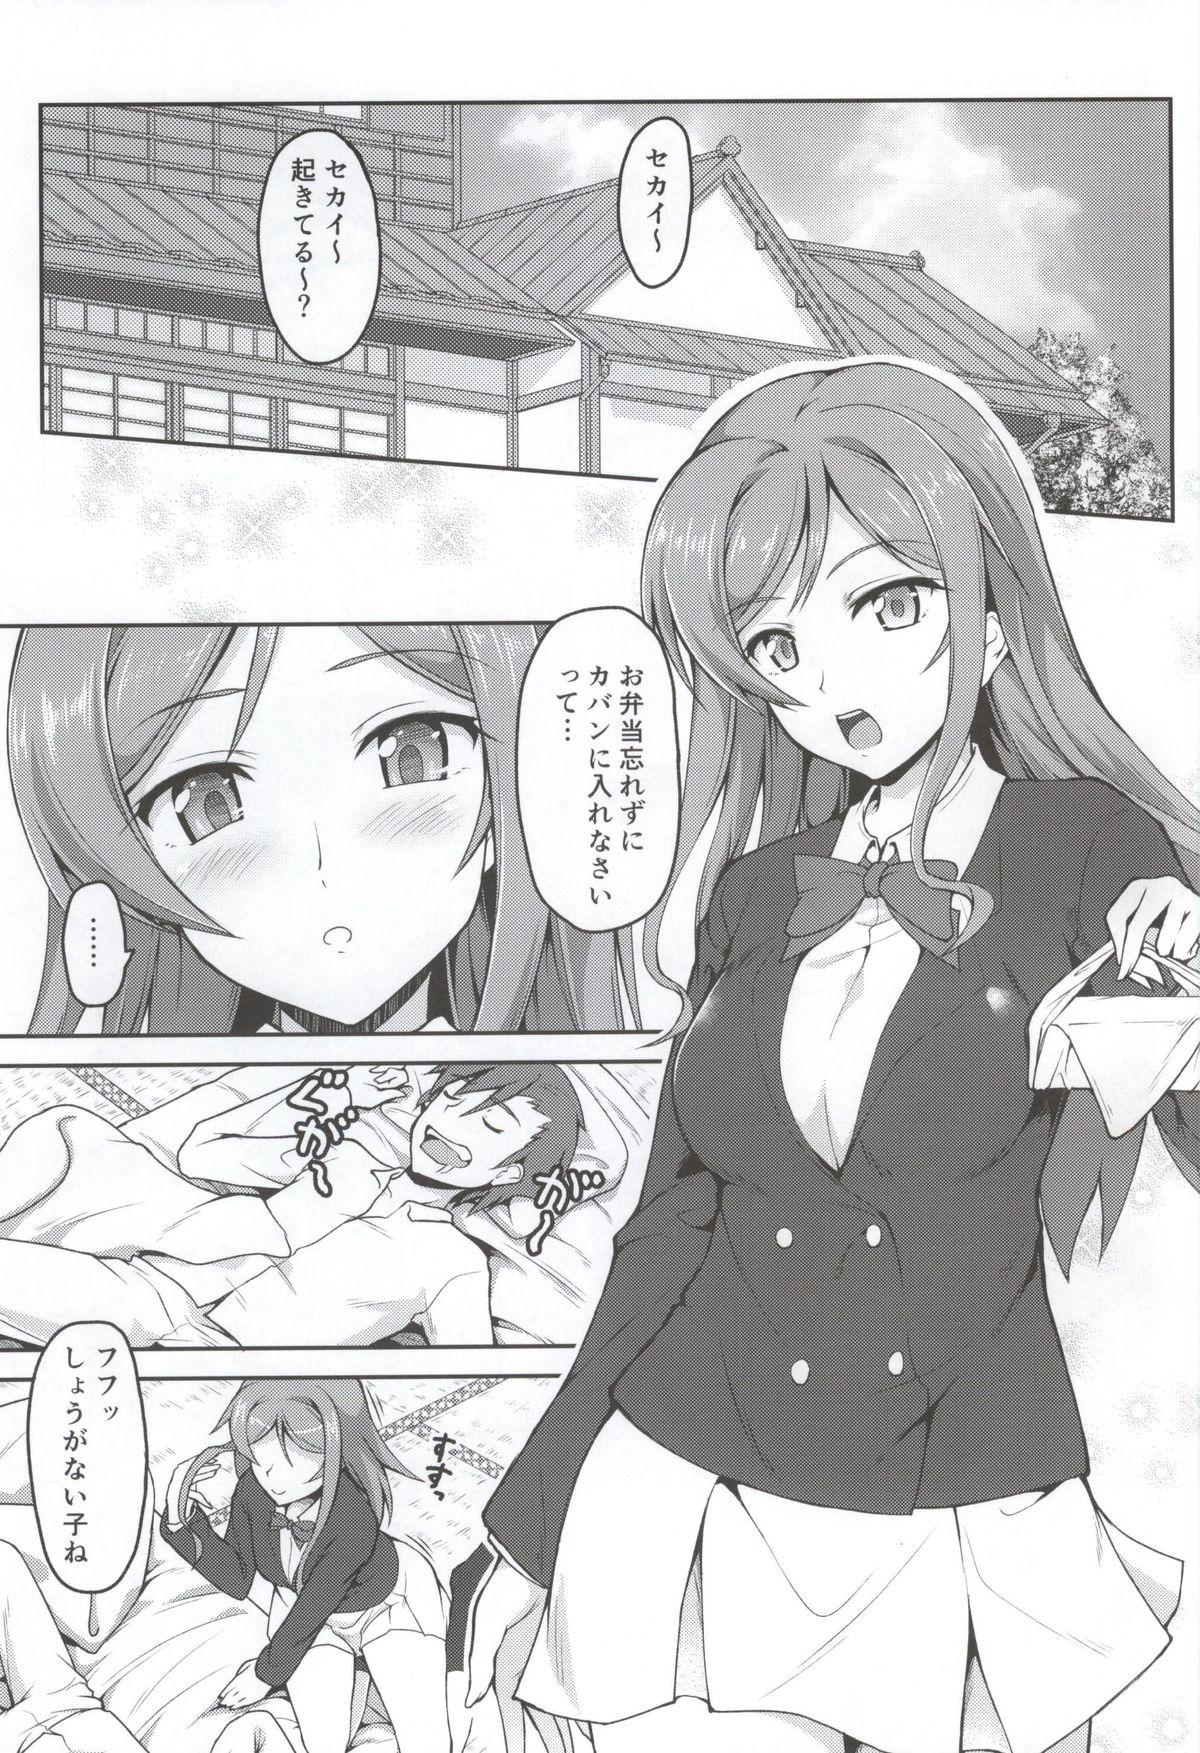 Leite Mirai no Sekai - Gundam build fighters try Oldvsyoung - Page 2